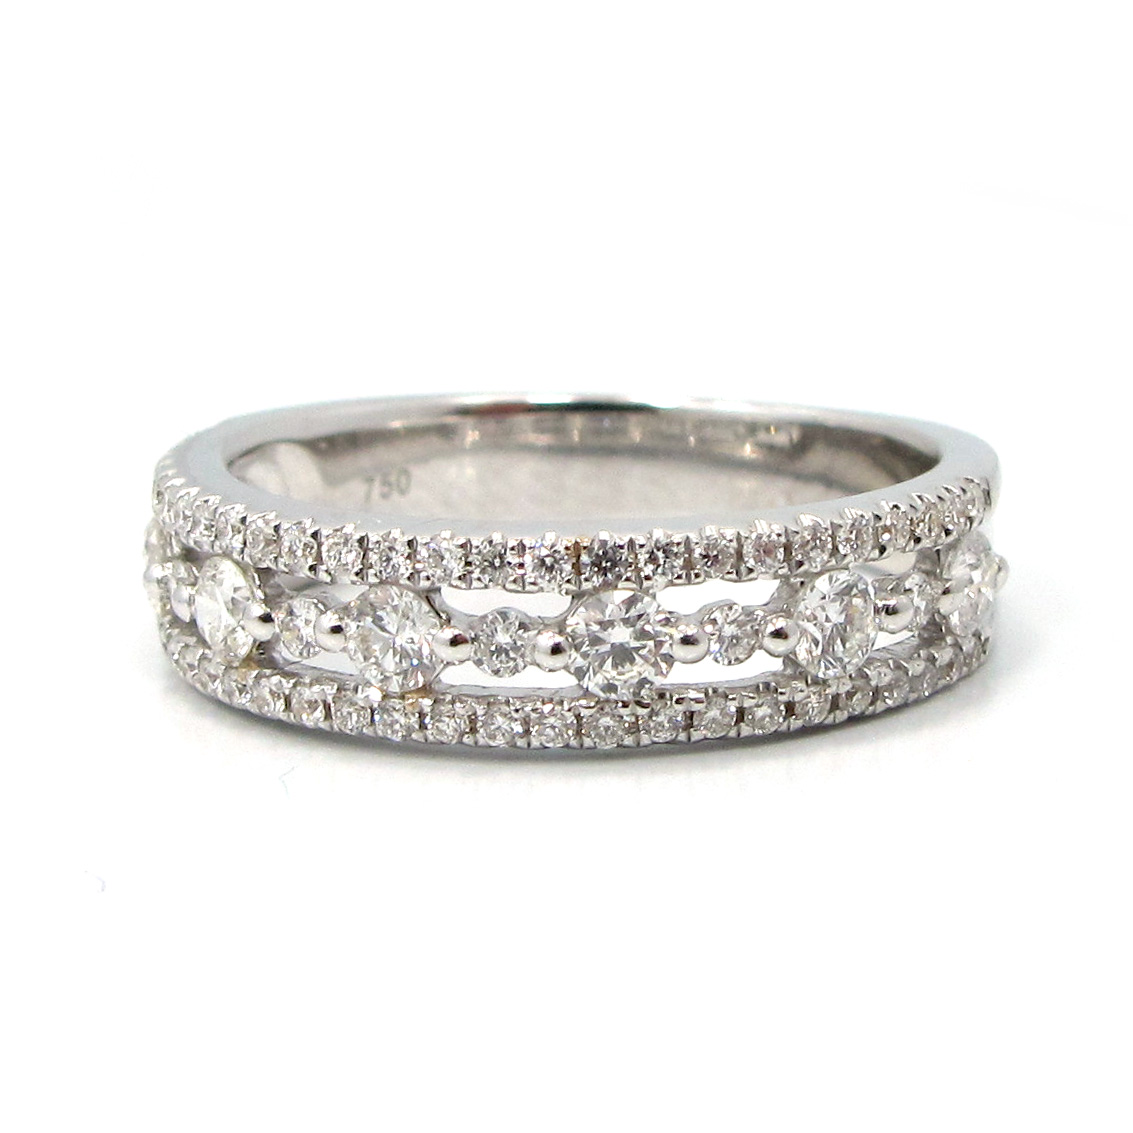 This is a picture of a 3 Row Round Diamond Band set in 18k White Gold